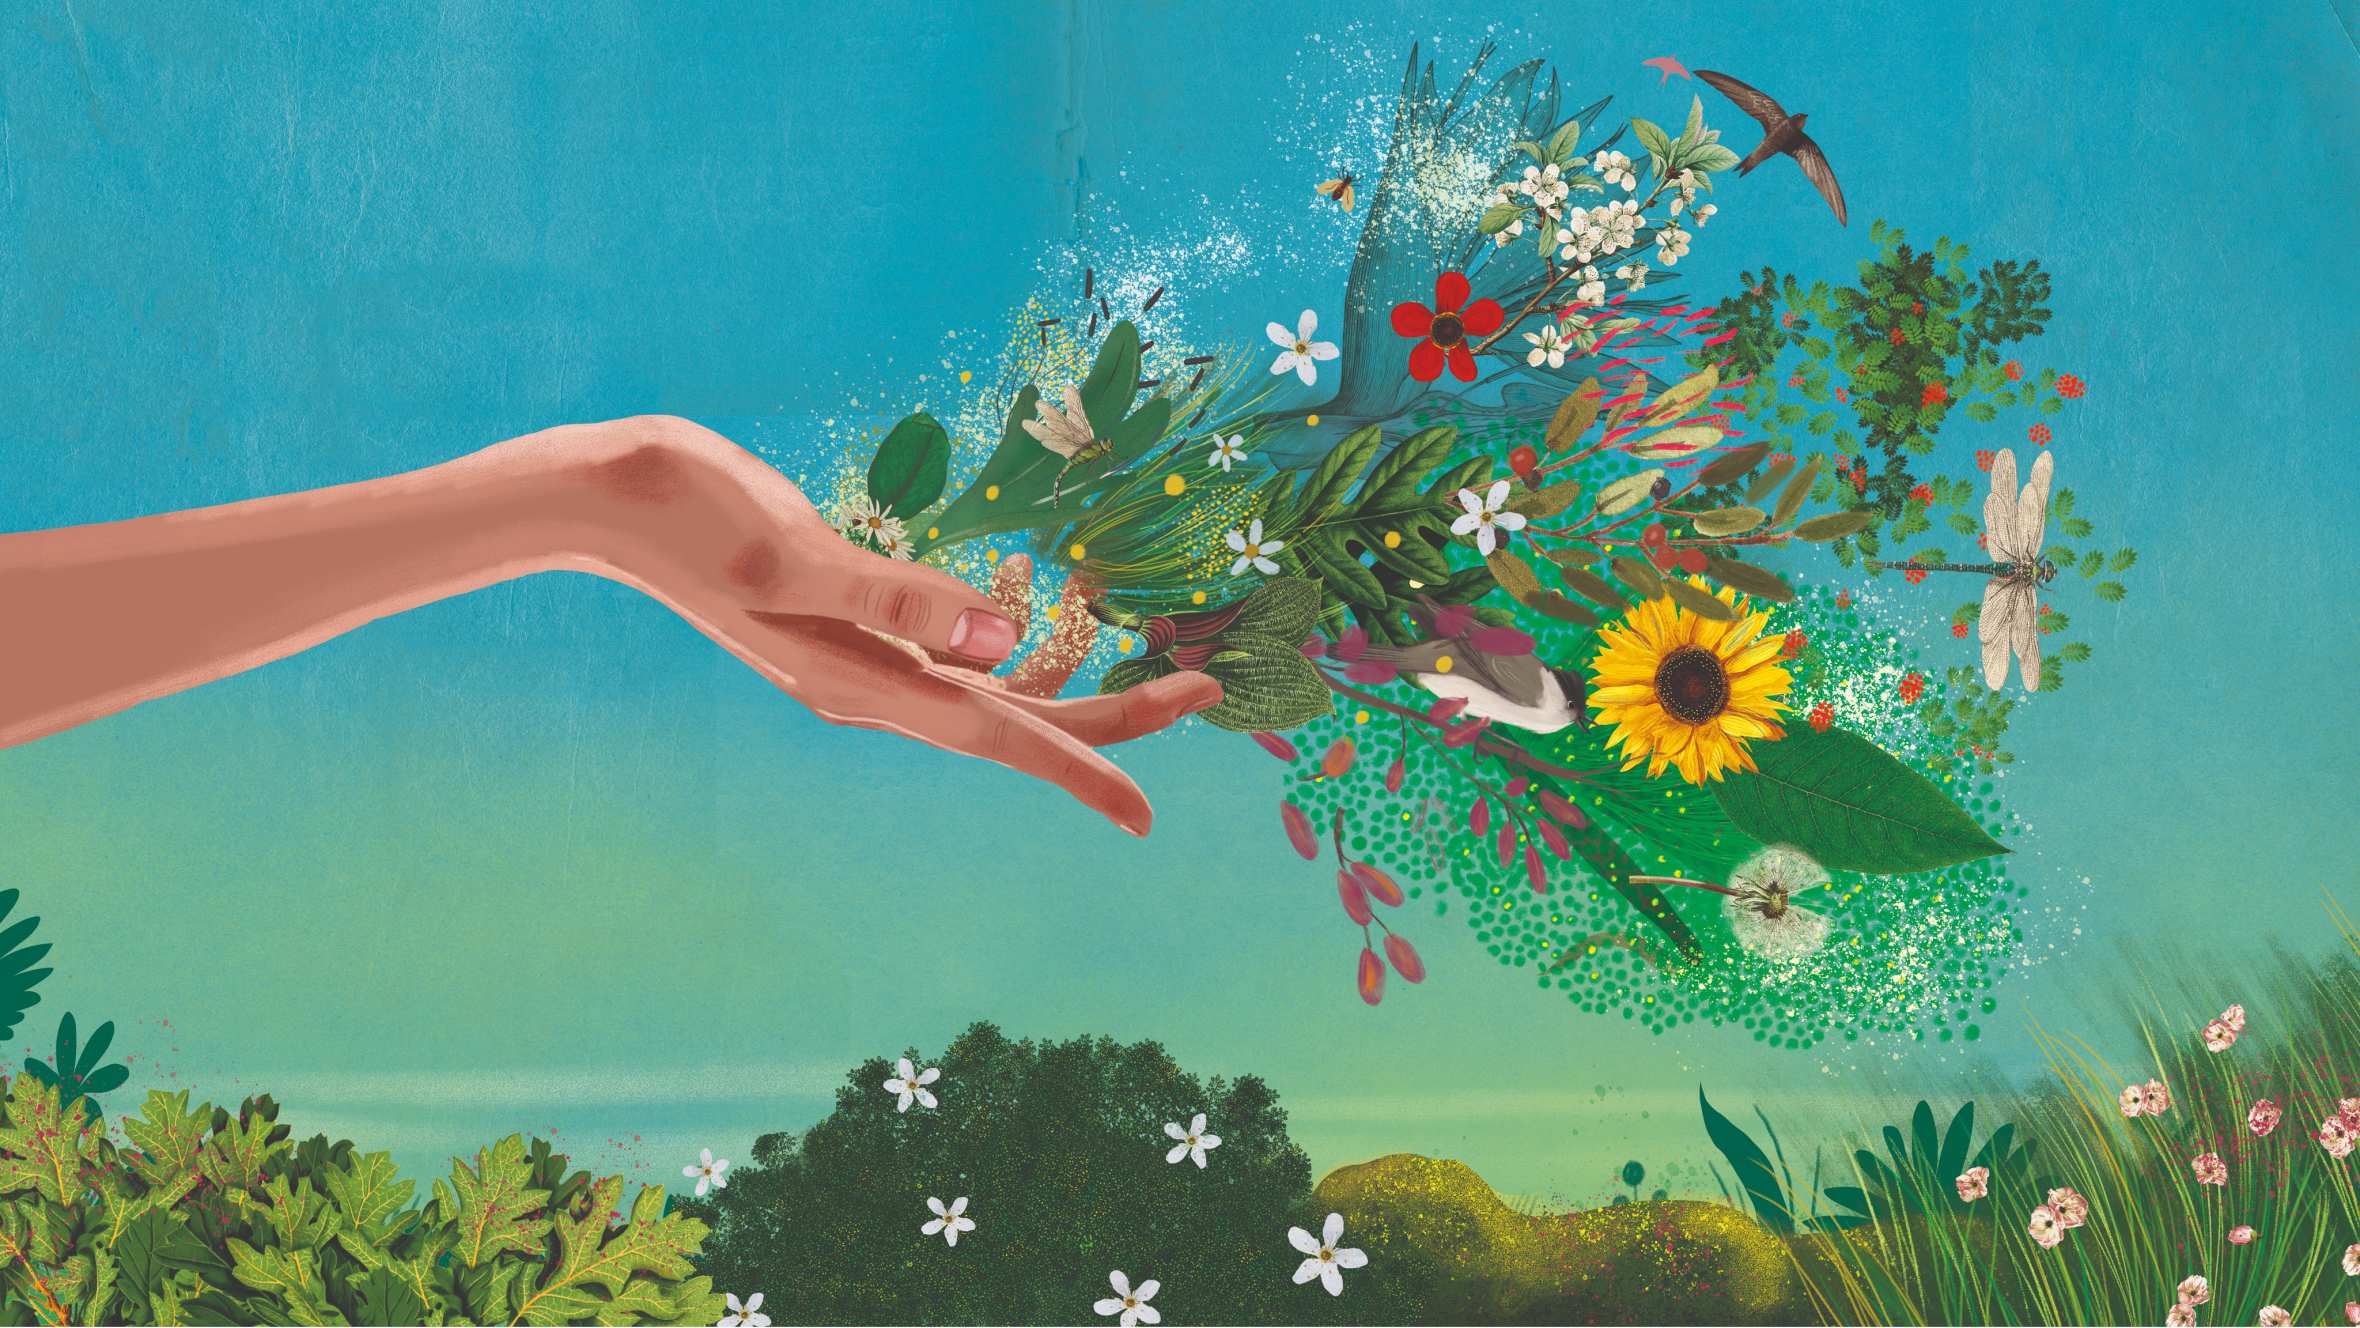 A hand is grasping a cluster of vibrant flowers, surrounded by a variety of insects